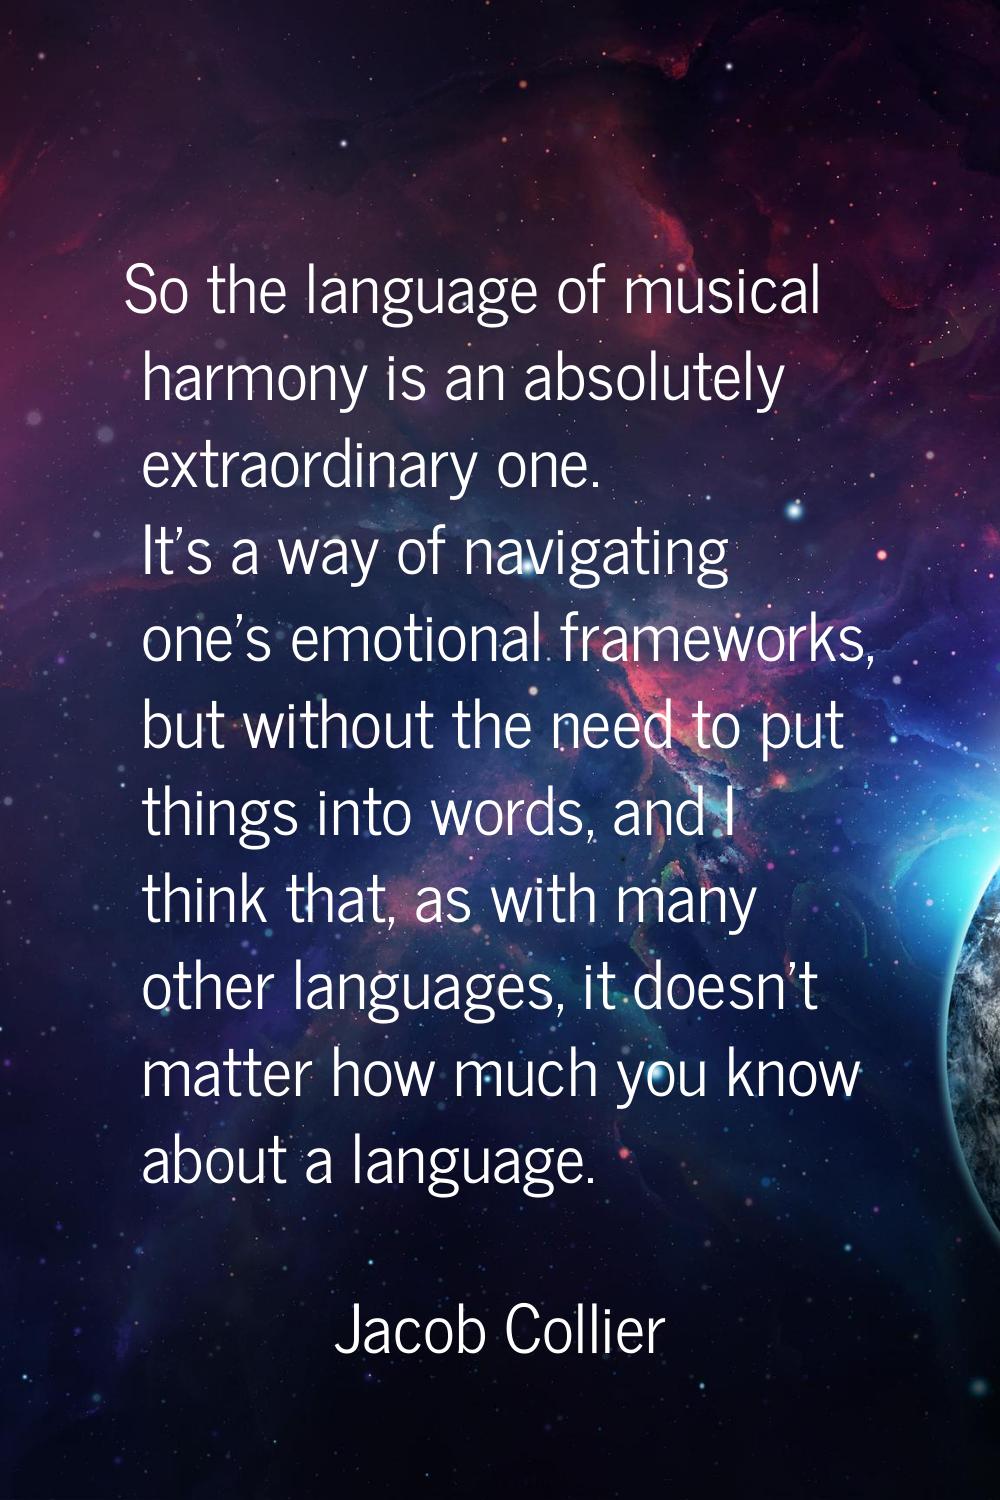 So the language of musical harmony is an absolutely extraordinary one. It's a way of navigating one